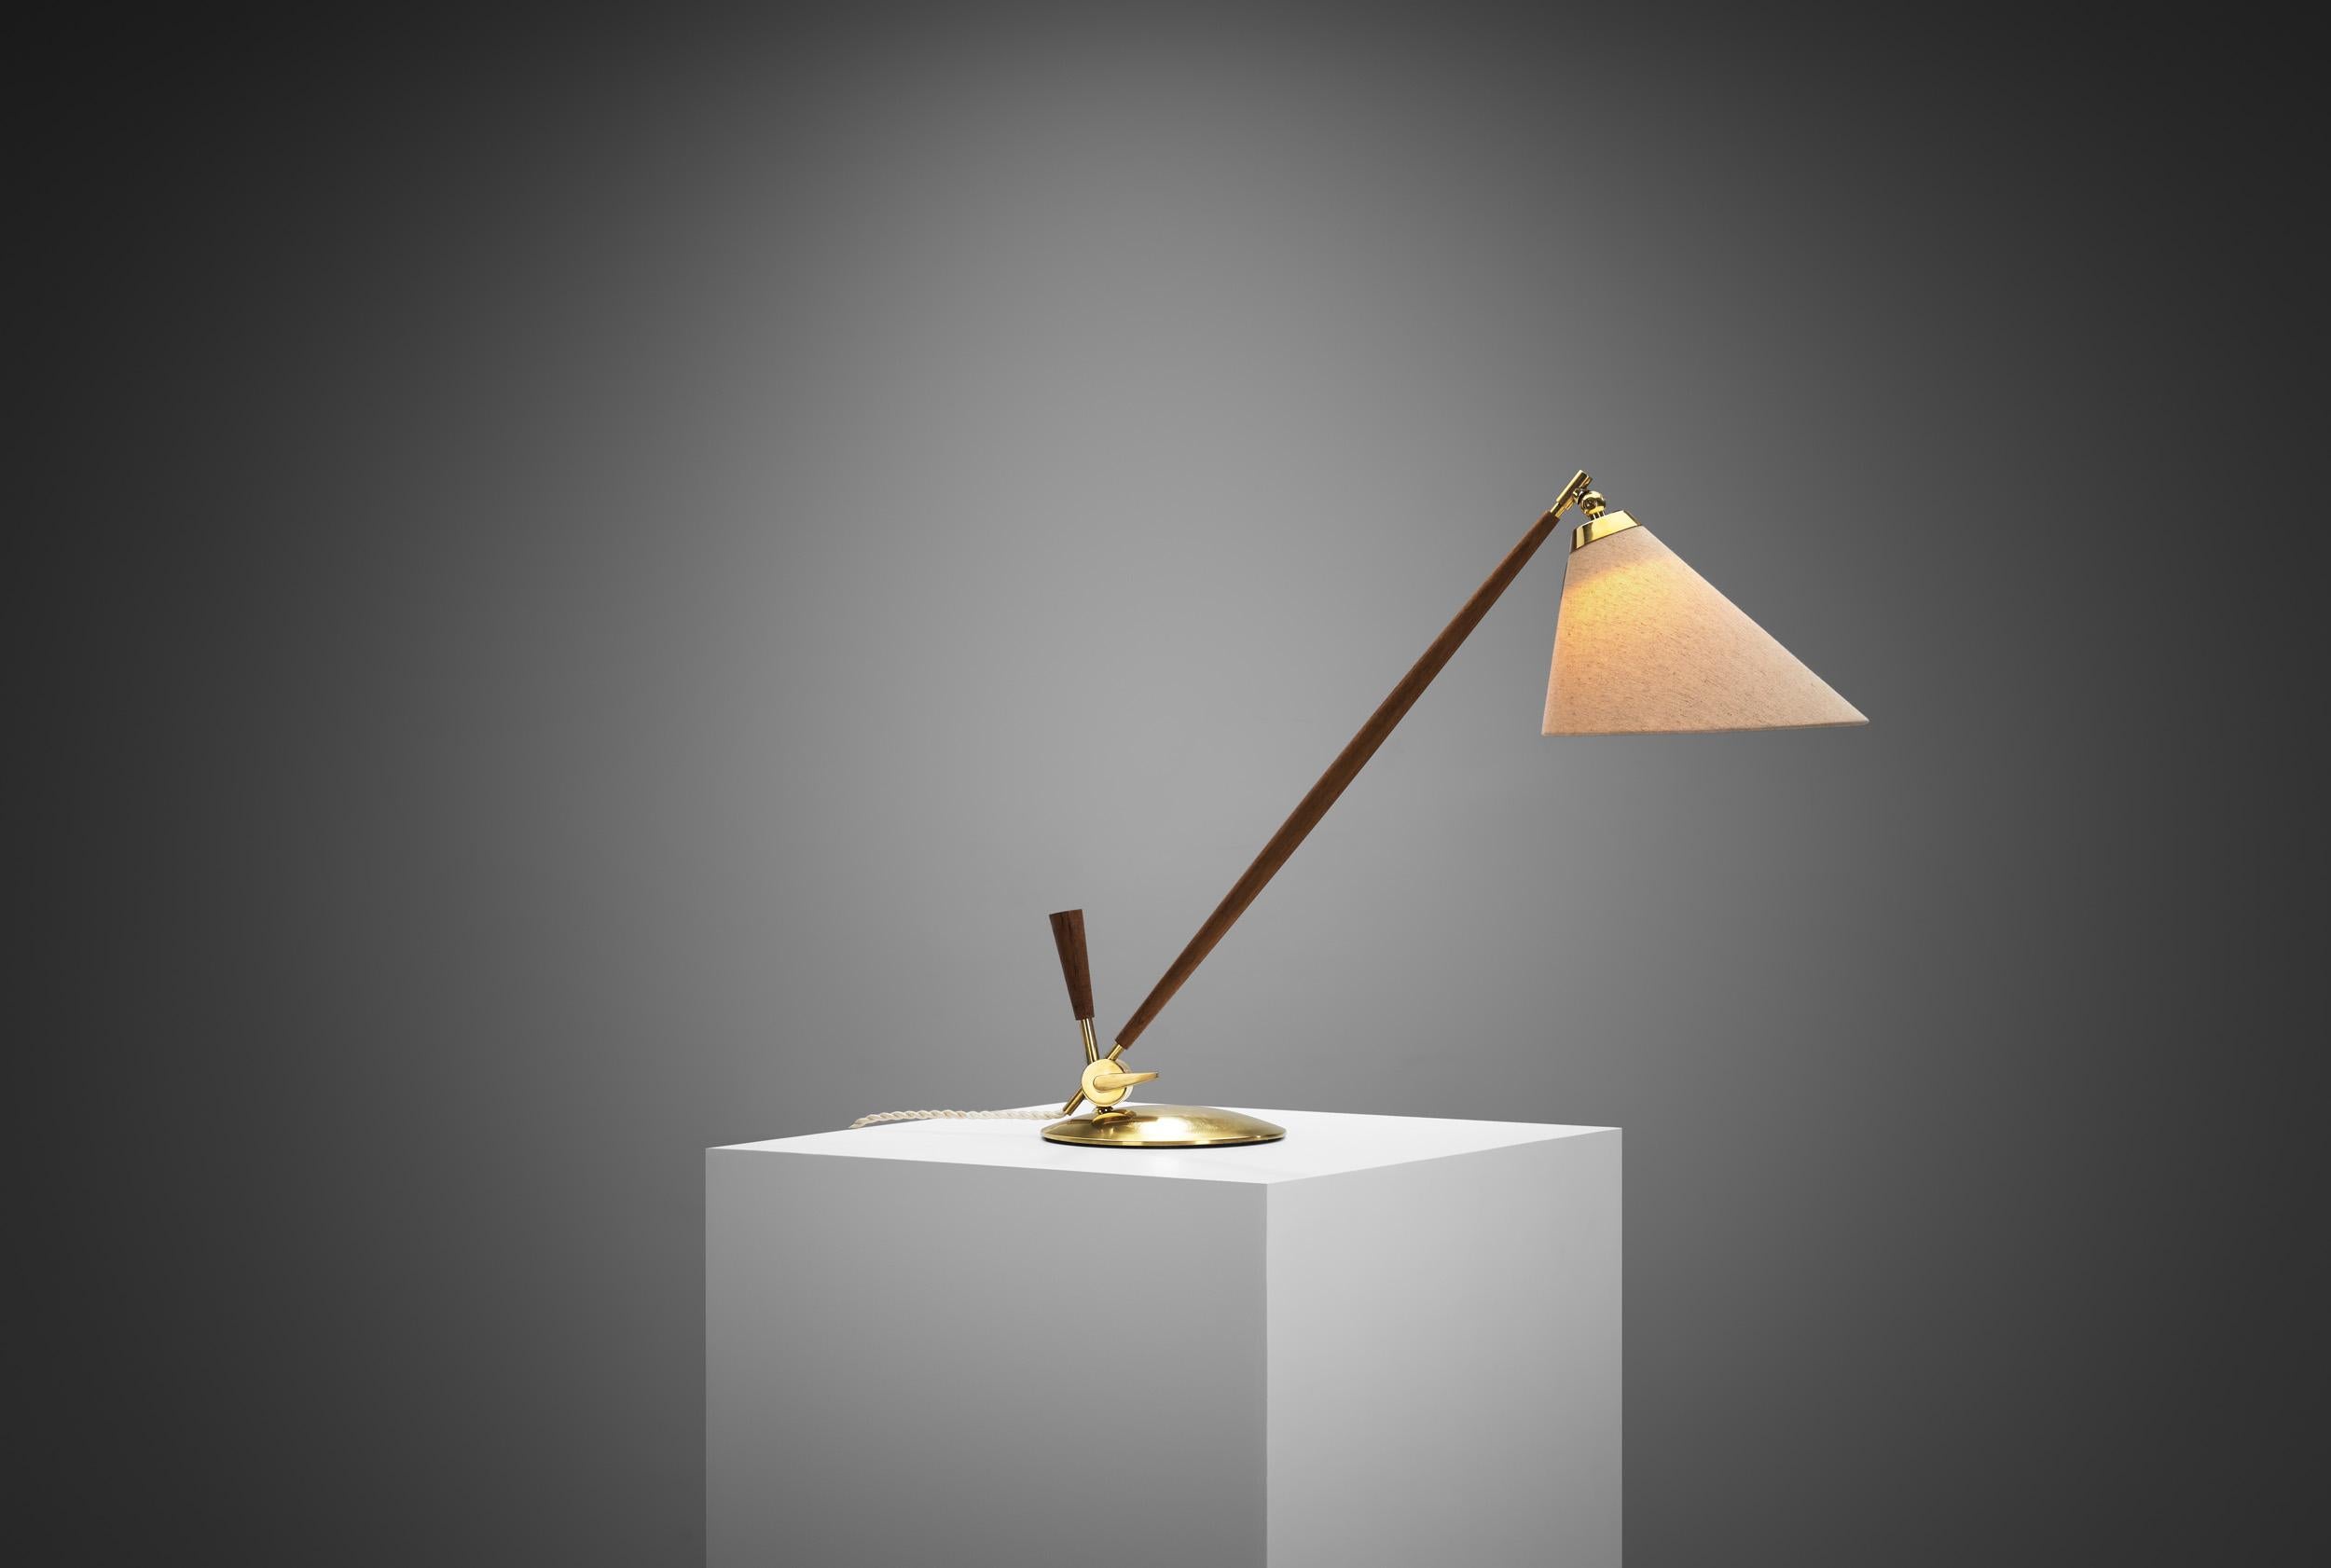 The ‘THV 375’ table lamp was designed by Thomas Valentiner and produced for Poul Dinesen in Denmark. Crafted from brass and teak, this fully adjustable table lamp is perfectly balanced and has an understated design. The Danish designer Th.